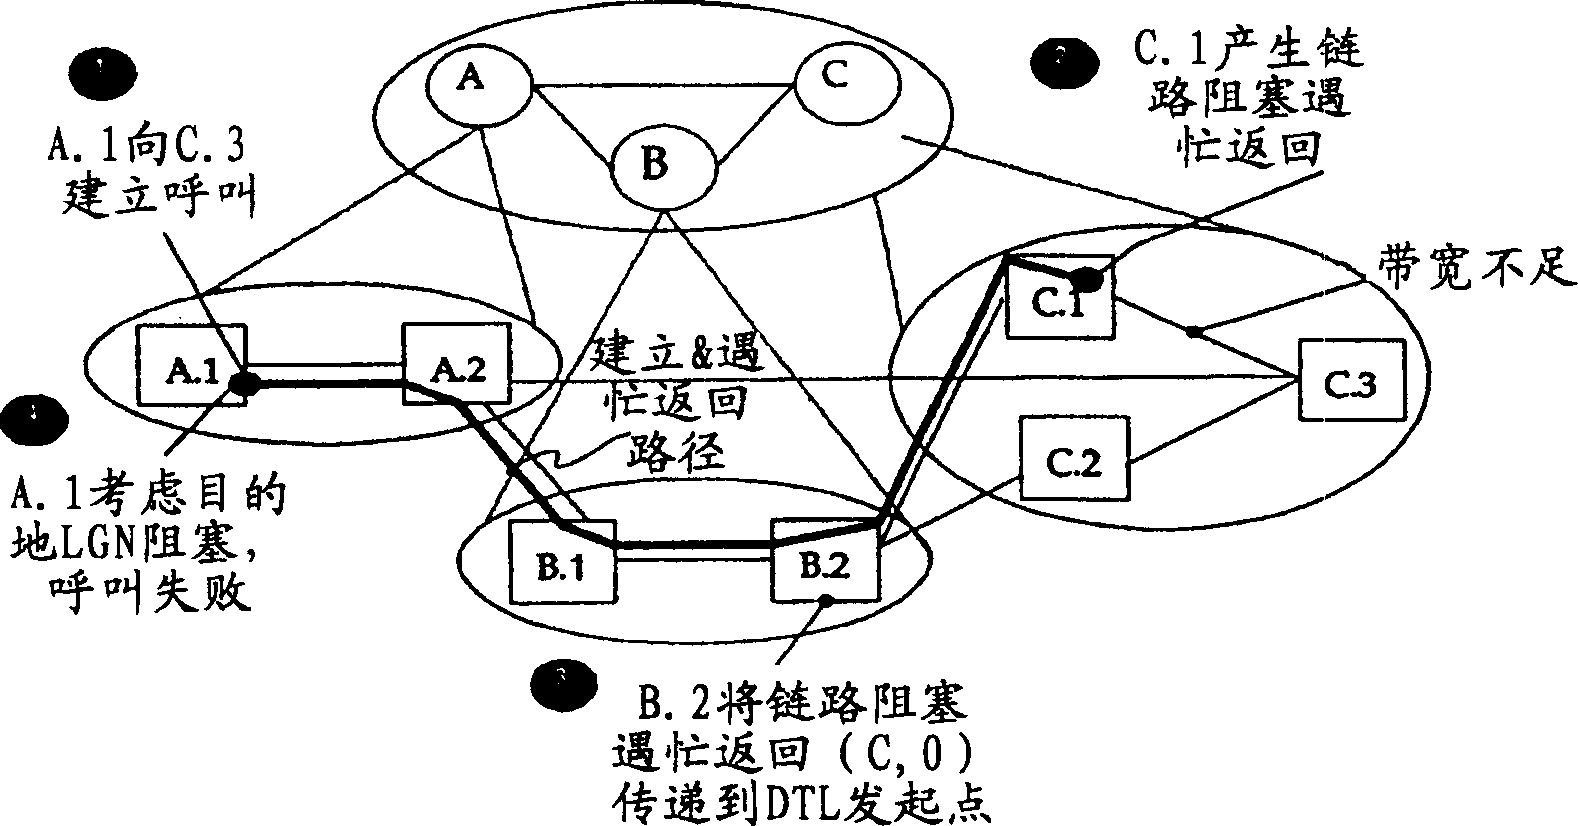 Method of improving calling route selection in special network node interface network